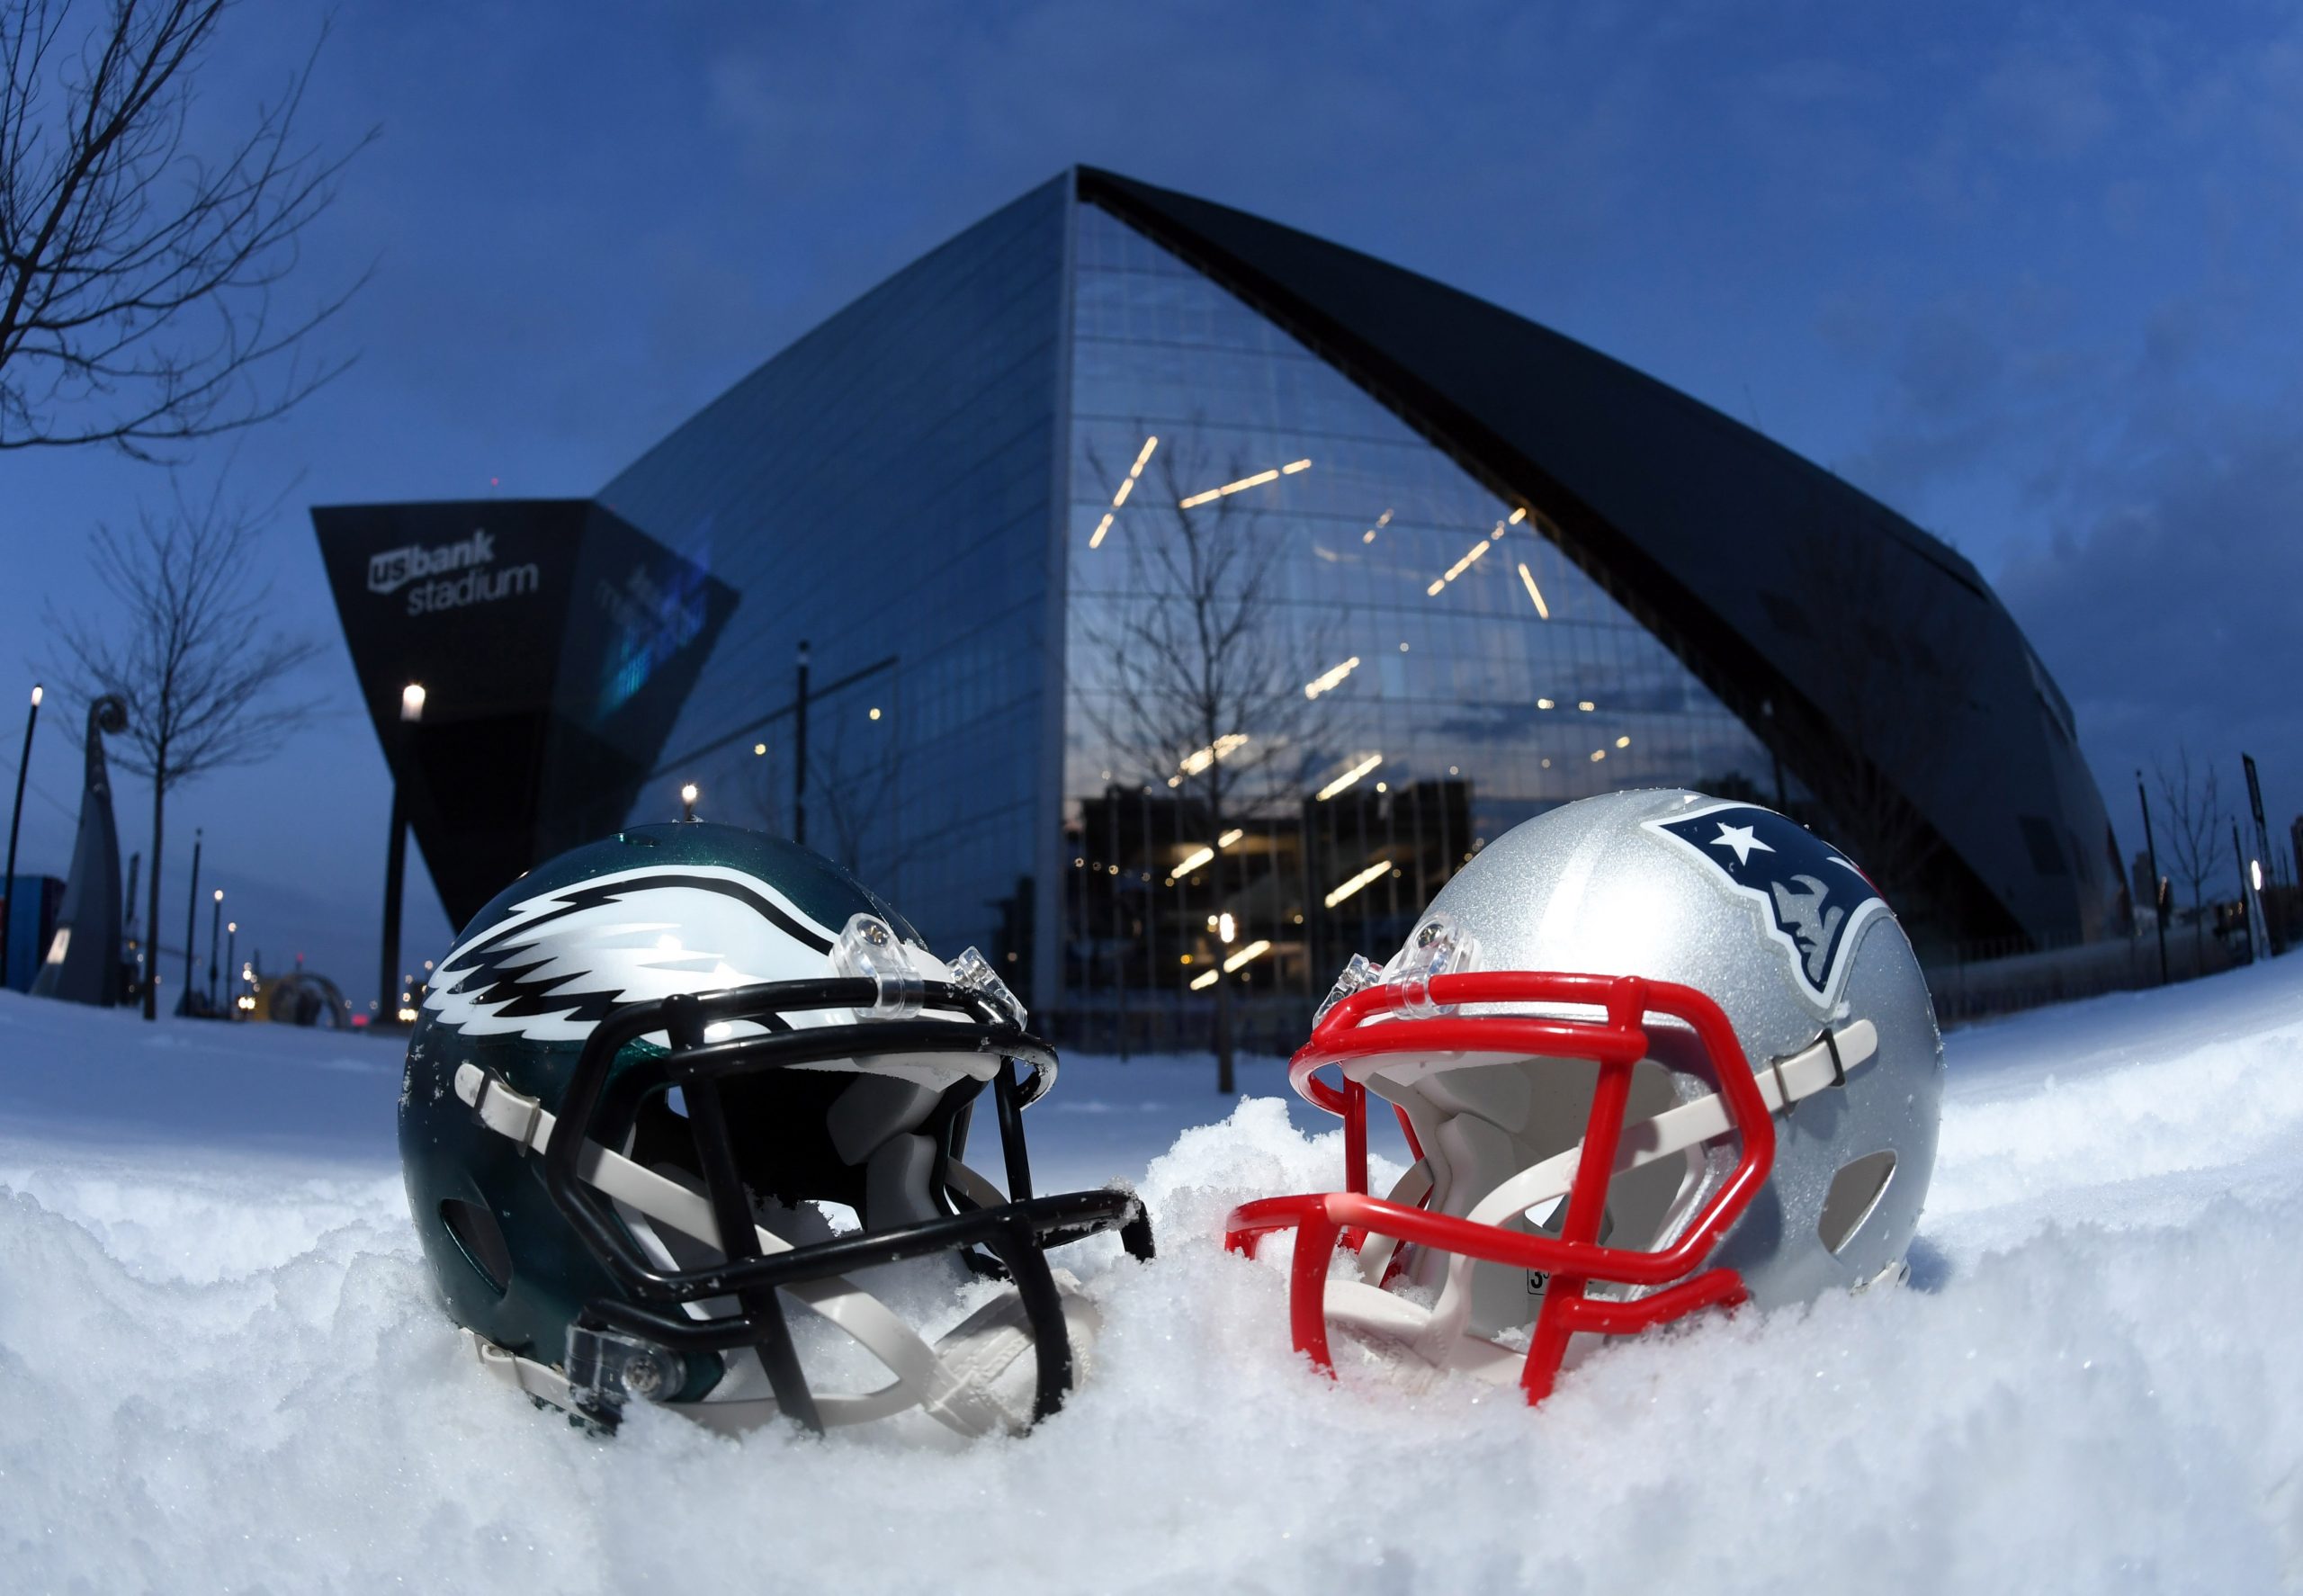 NFL: Super Bowl LII Experience